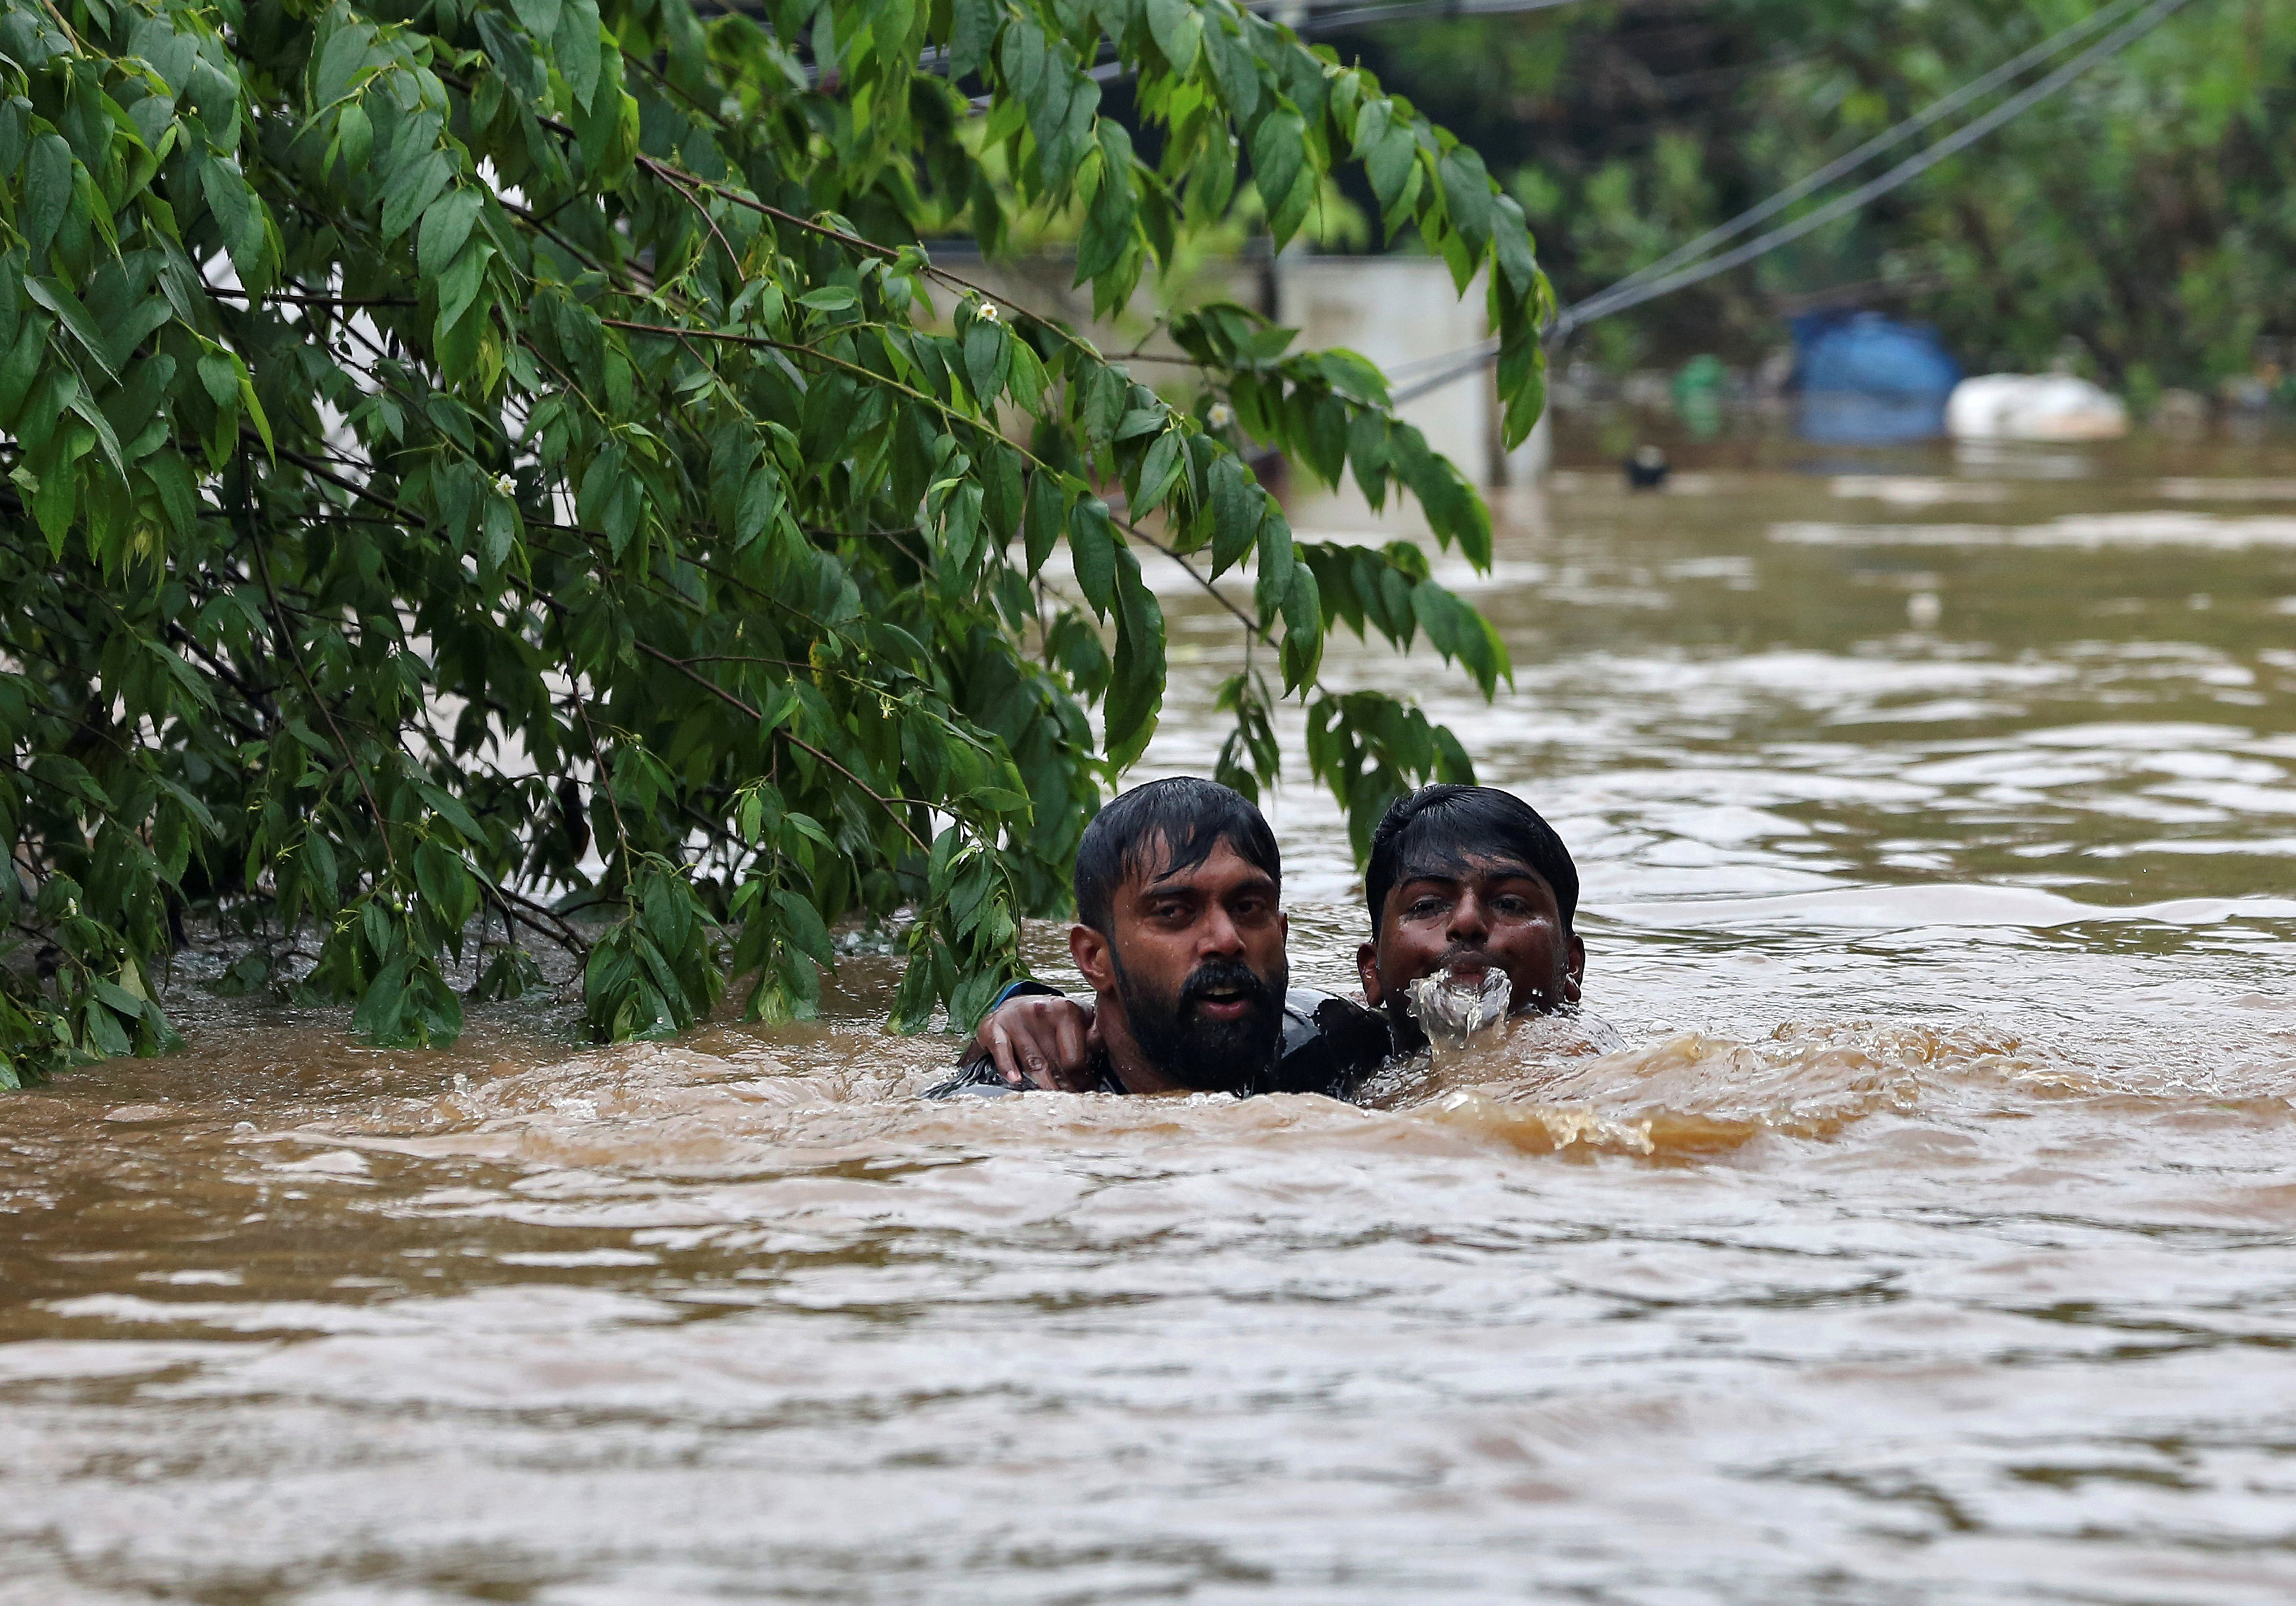 A man rescues a drowning man from a flooded area after the opening of Idamalayr, Cheruthoni and Mullaperiyar dam shutters following heavy rains, on the outskirts of Kochi